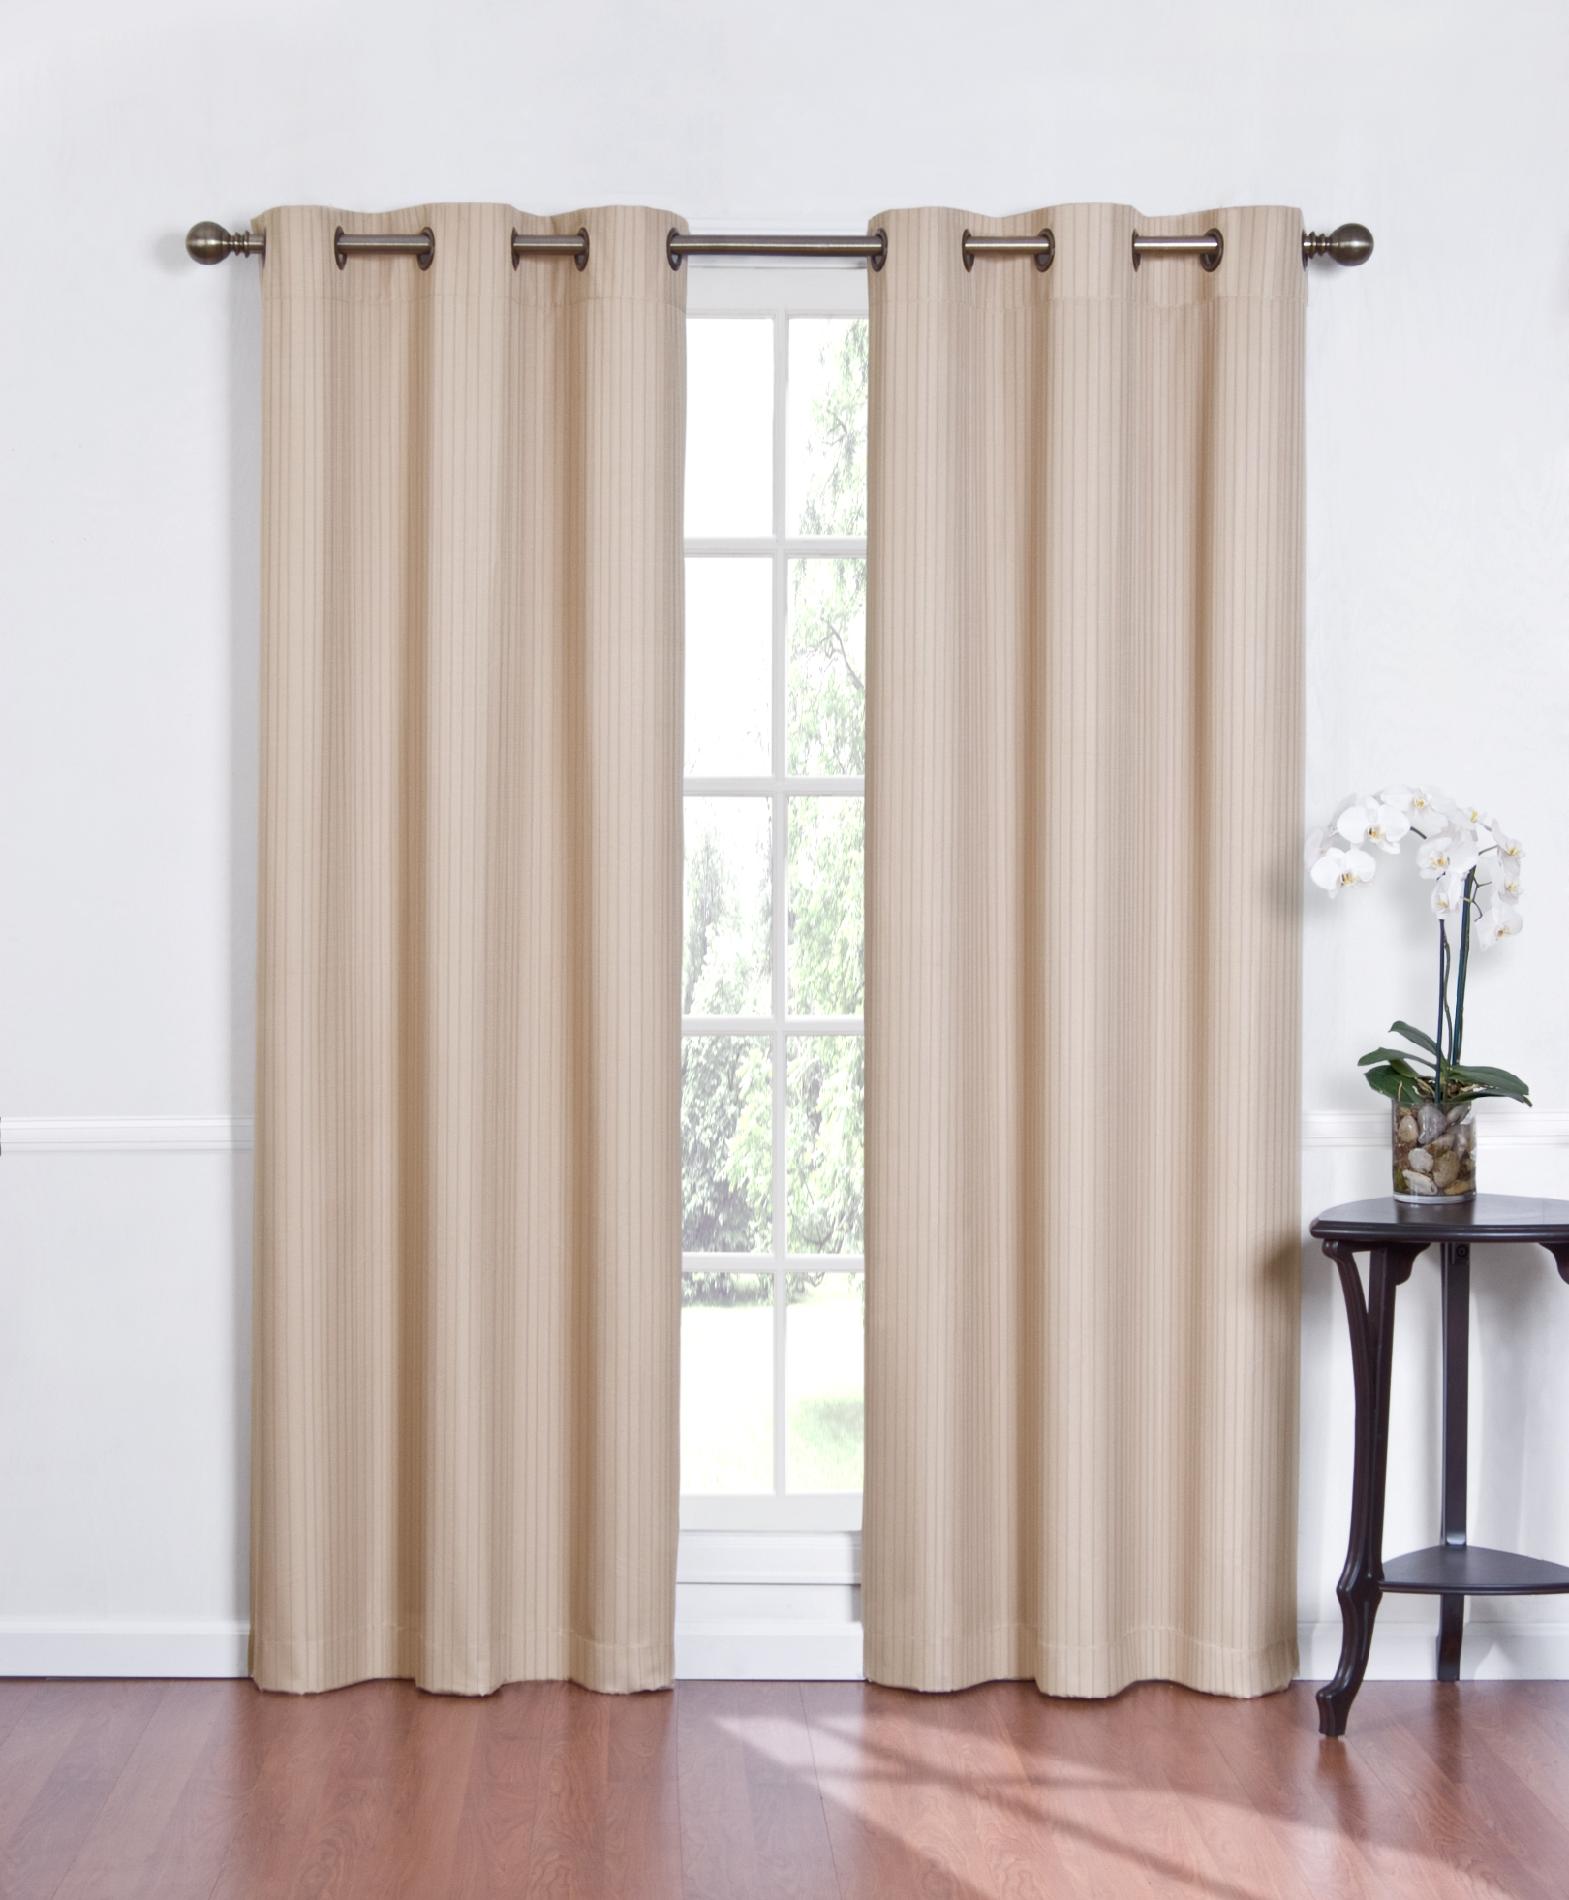 Thermal Foam-Backed Curtain: Keep Temperatures at Bay with Kmart